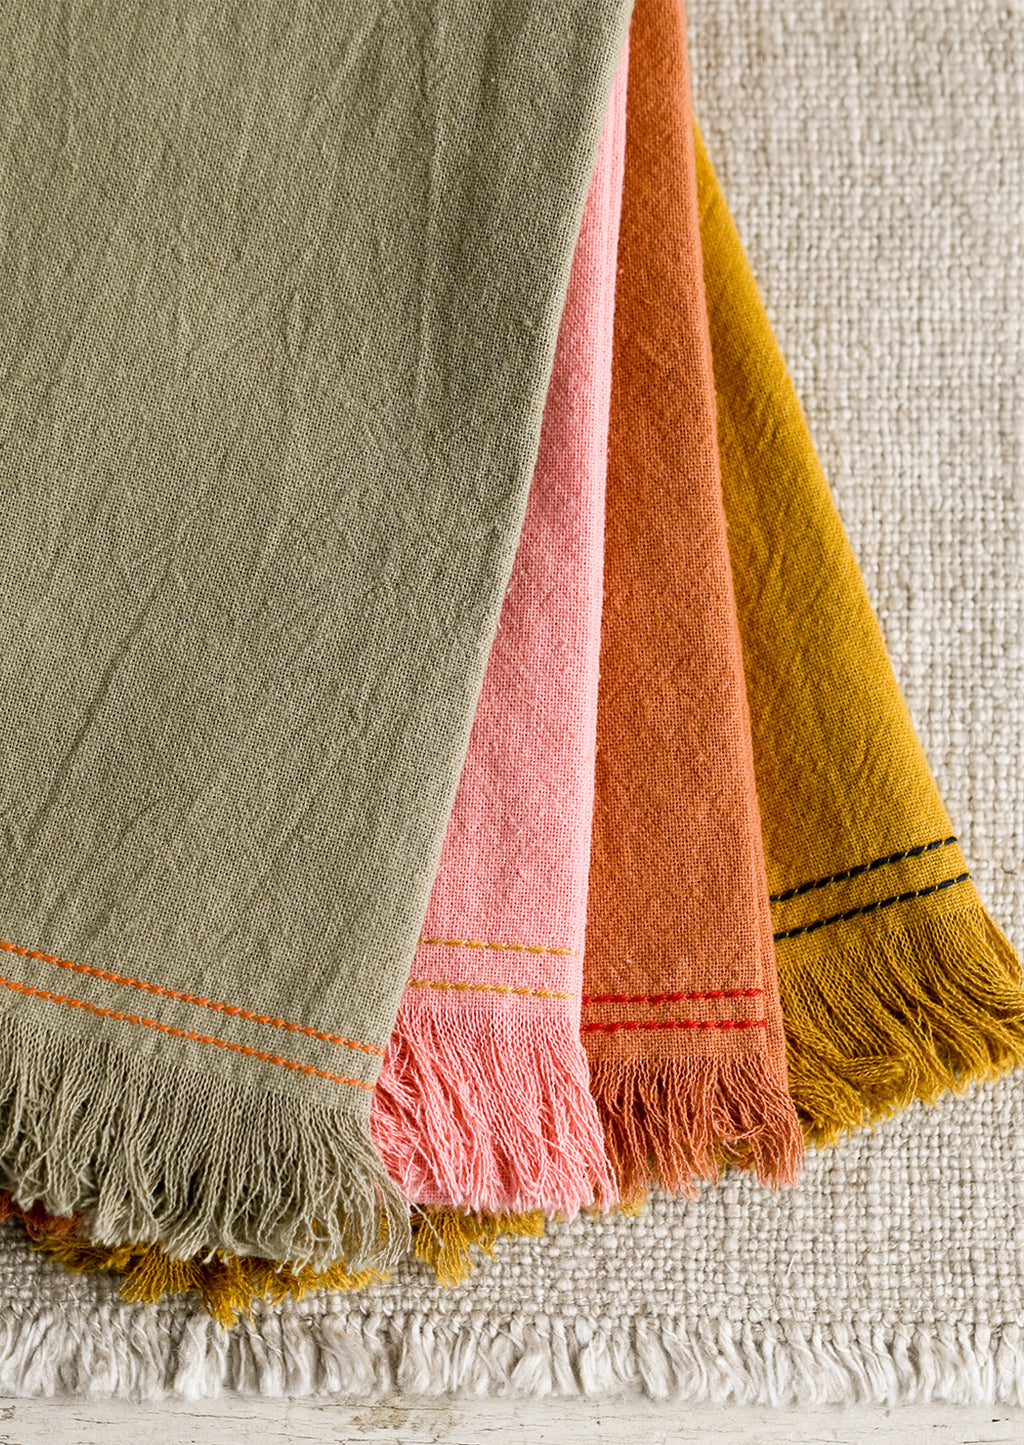 3: Assorted colors of cotton tea towel with contrast stitchings.